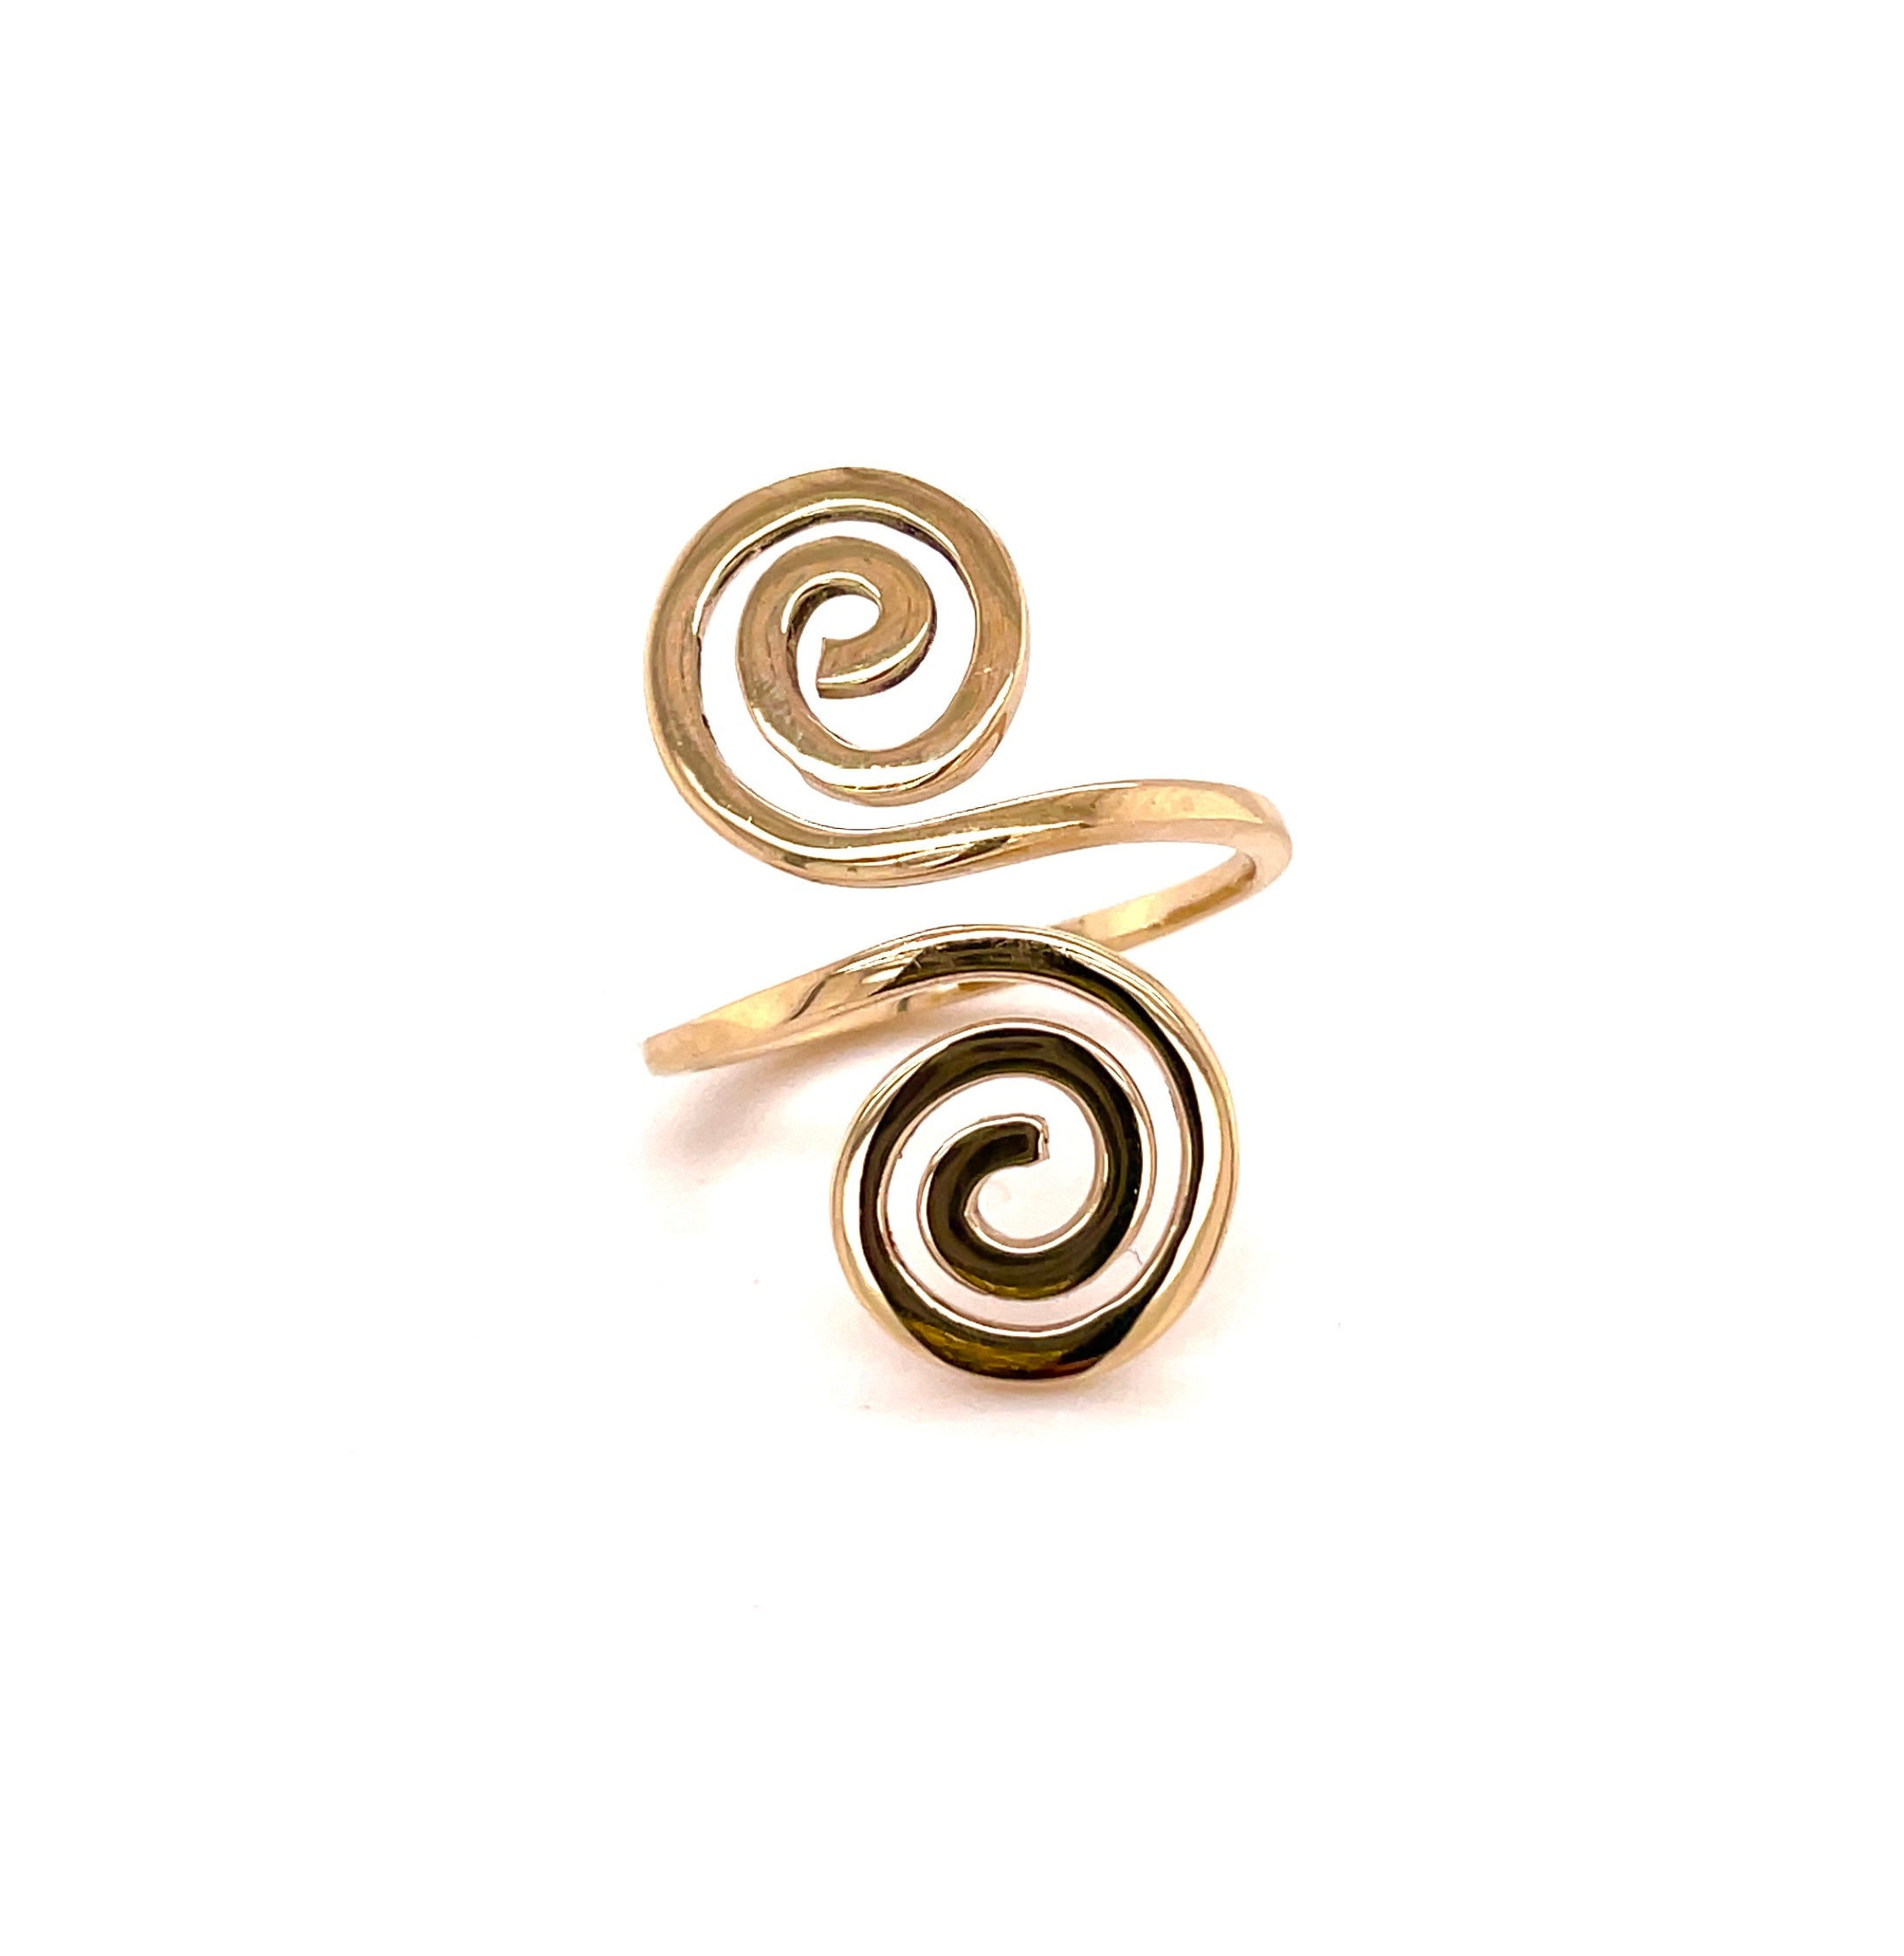 14k yellow gold ring  Size 7 (sizable)  Doble swirl style  27.00 mm lenght